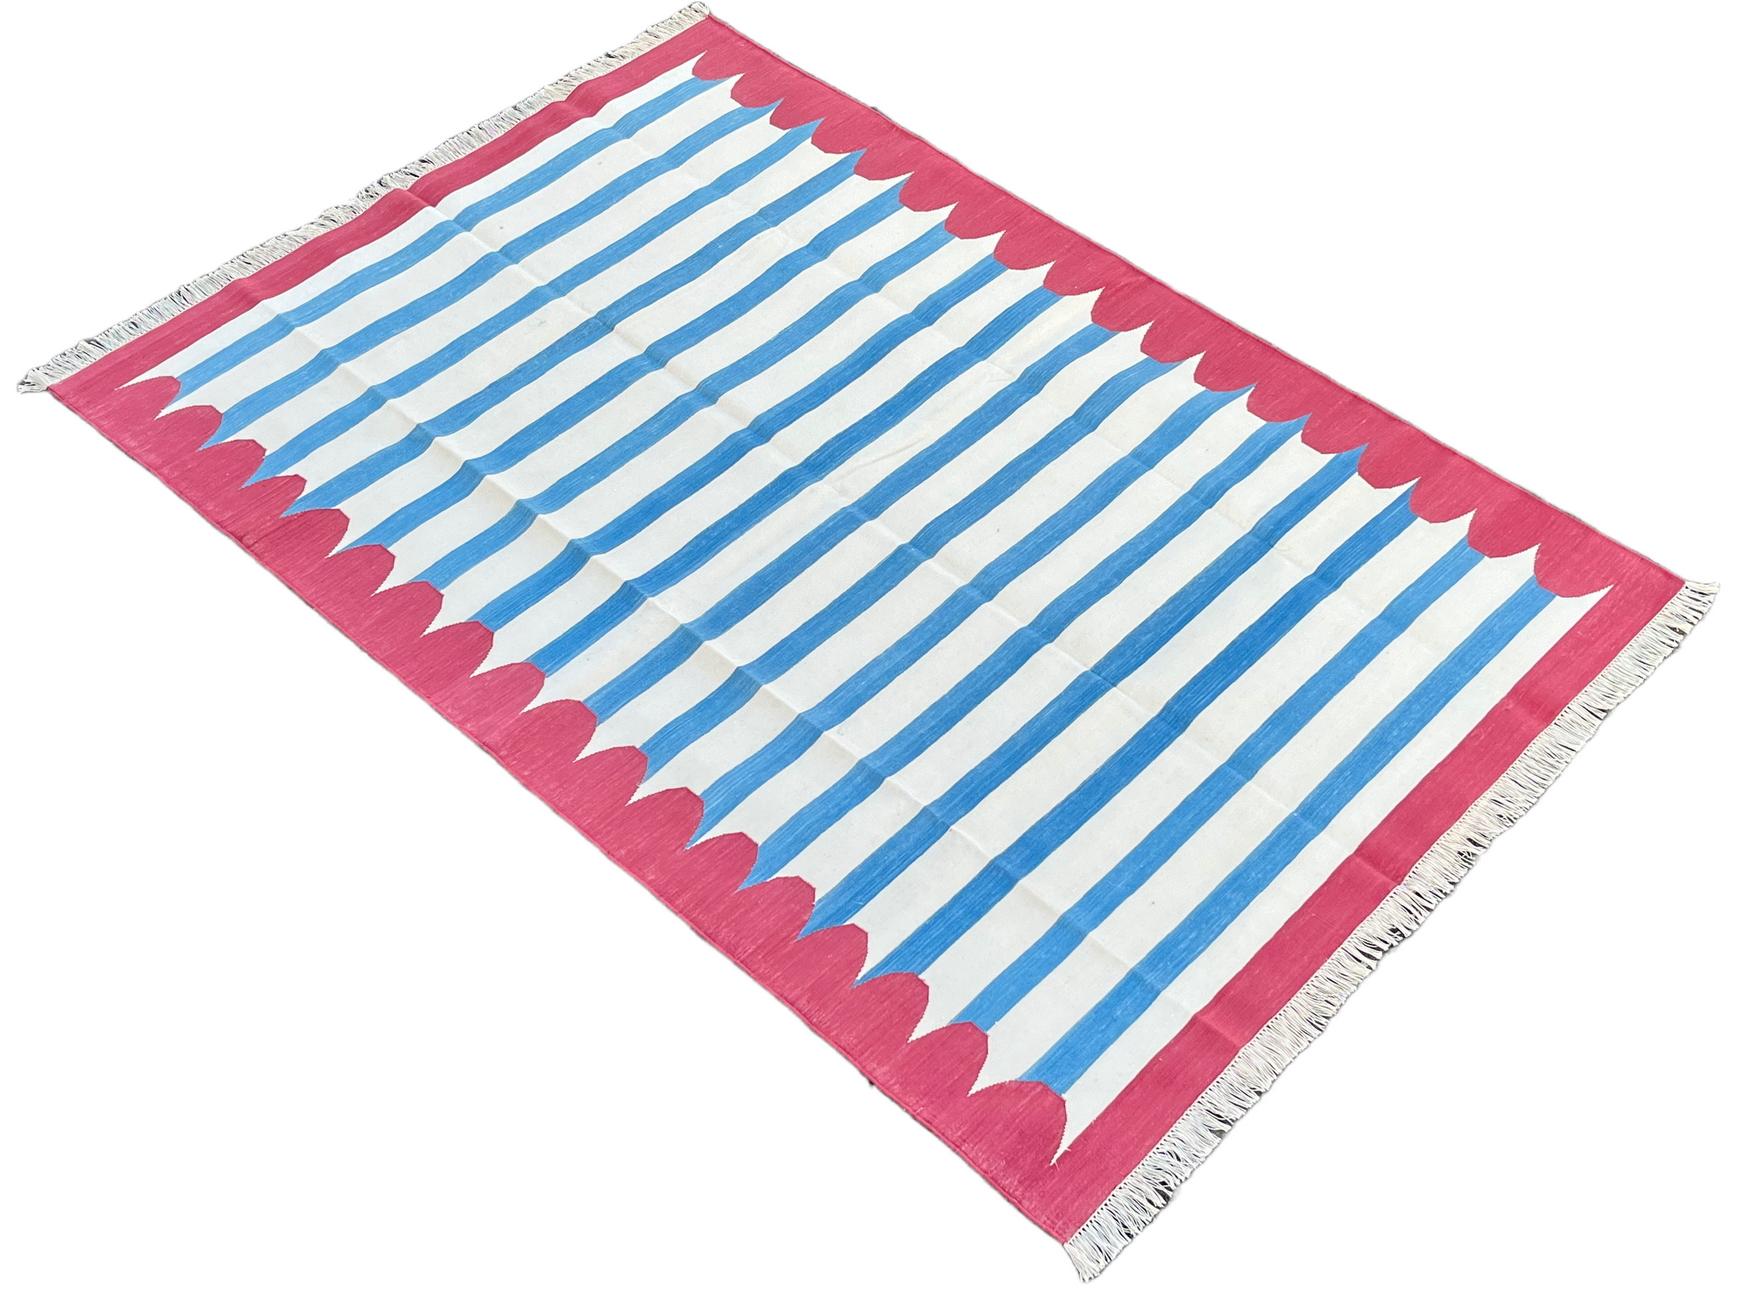 Cotton Vegetable Dyed Blue, White And Raspberry Pink Scalloped Striped Indian Dhurrie Rug-5'x7' 
These special flat-weave dhurries are hand-woven with 15 ply 100% cotton yarn. Due to the special manufacturing techniques used to create our rugs, the